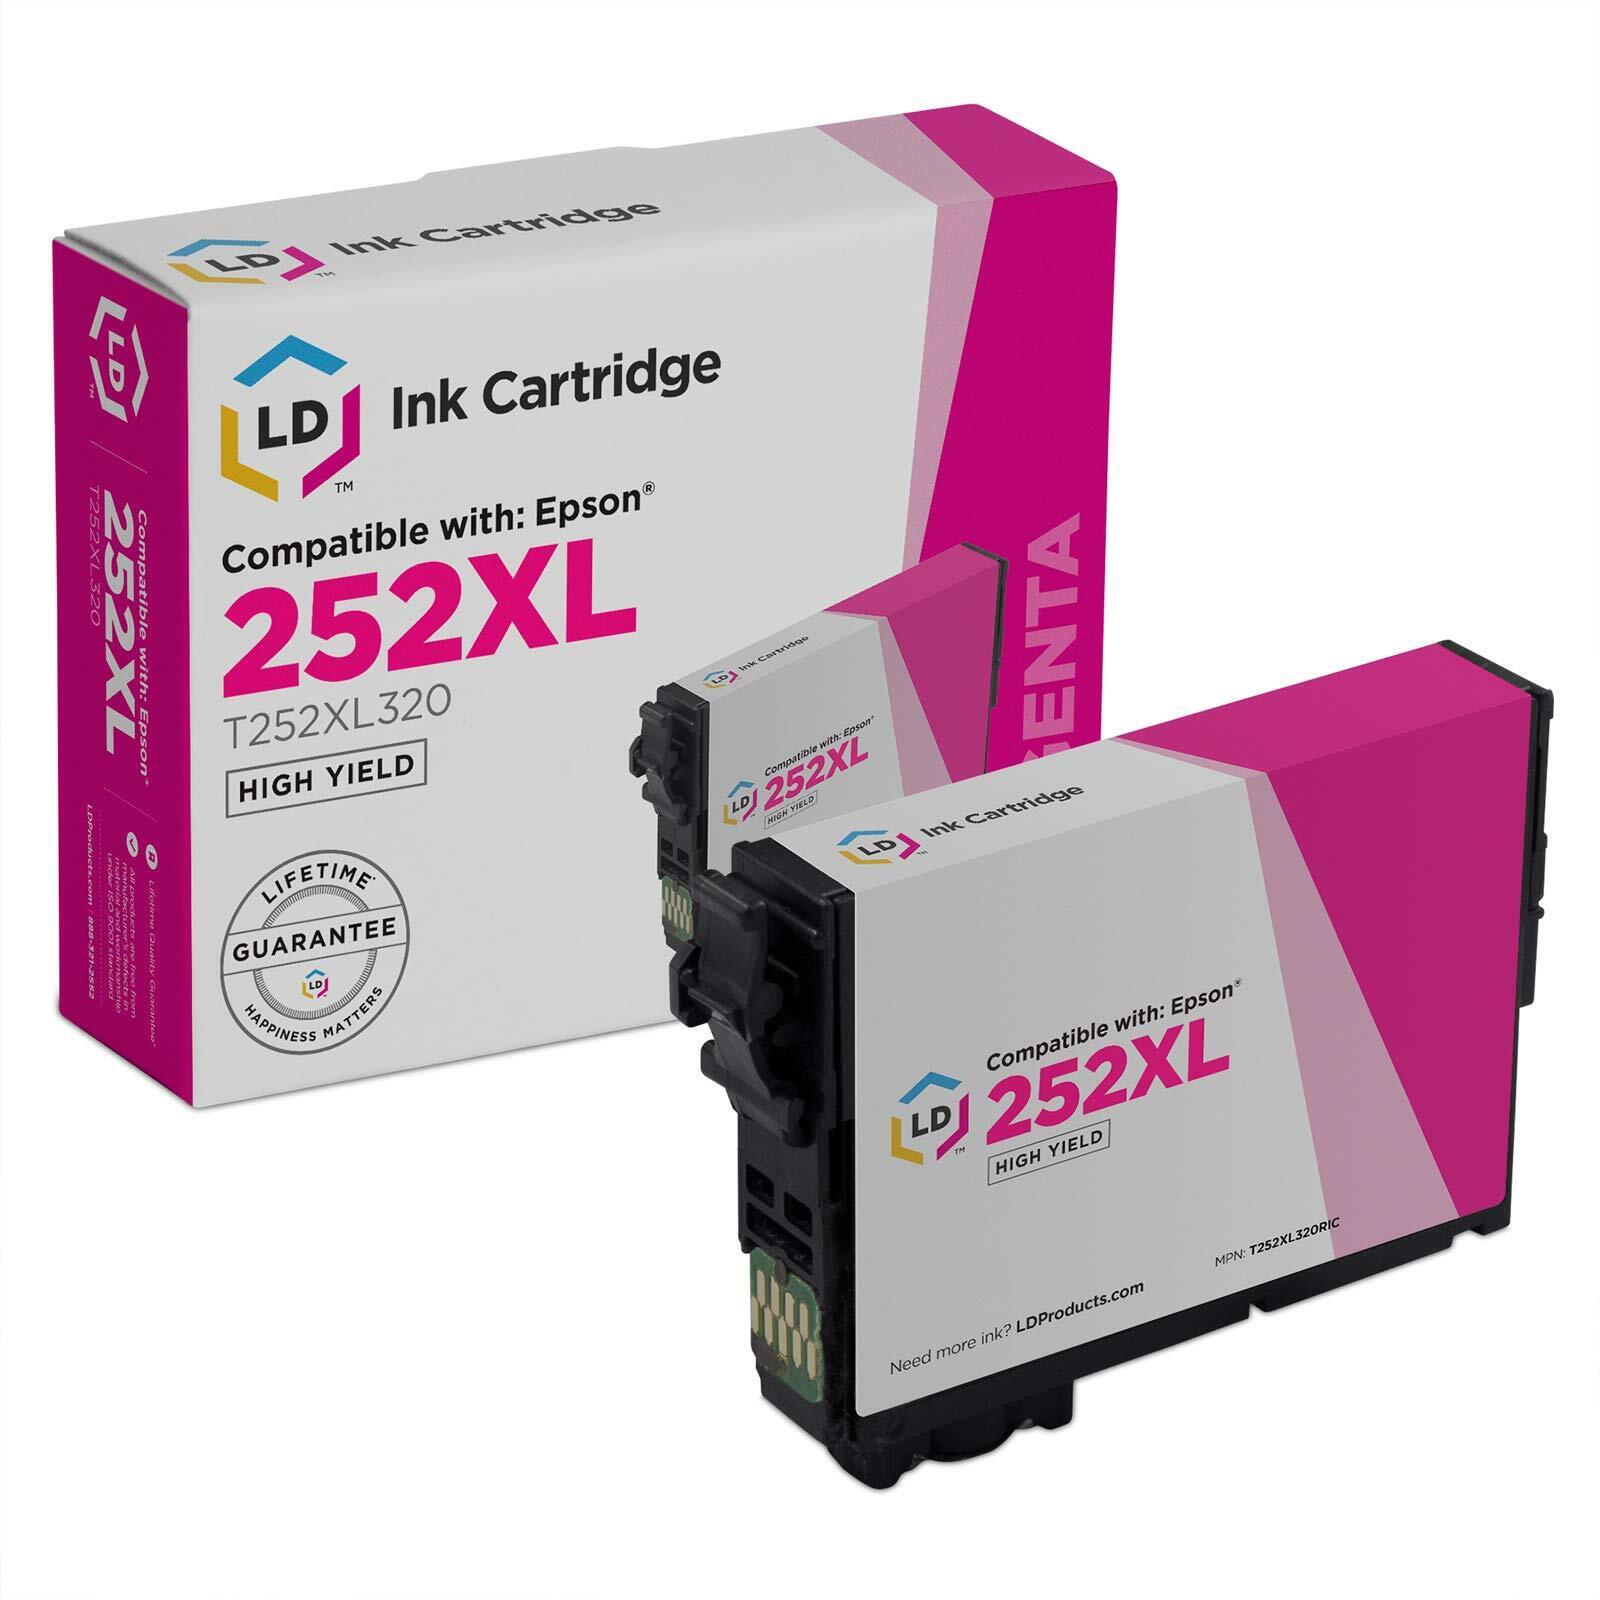 LD Products Ink Cartridge Replacement for Epson 252XL XL T252XL320 HY Magenta